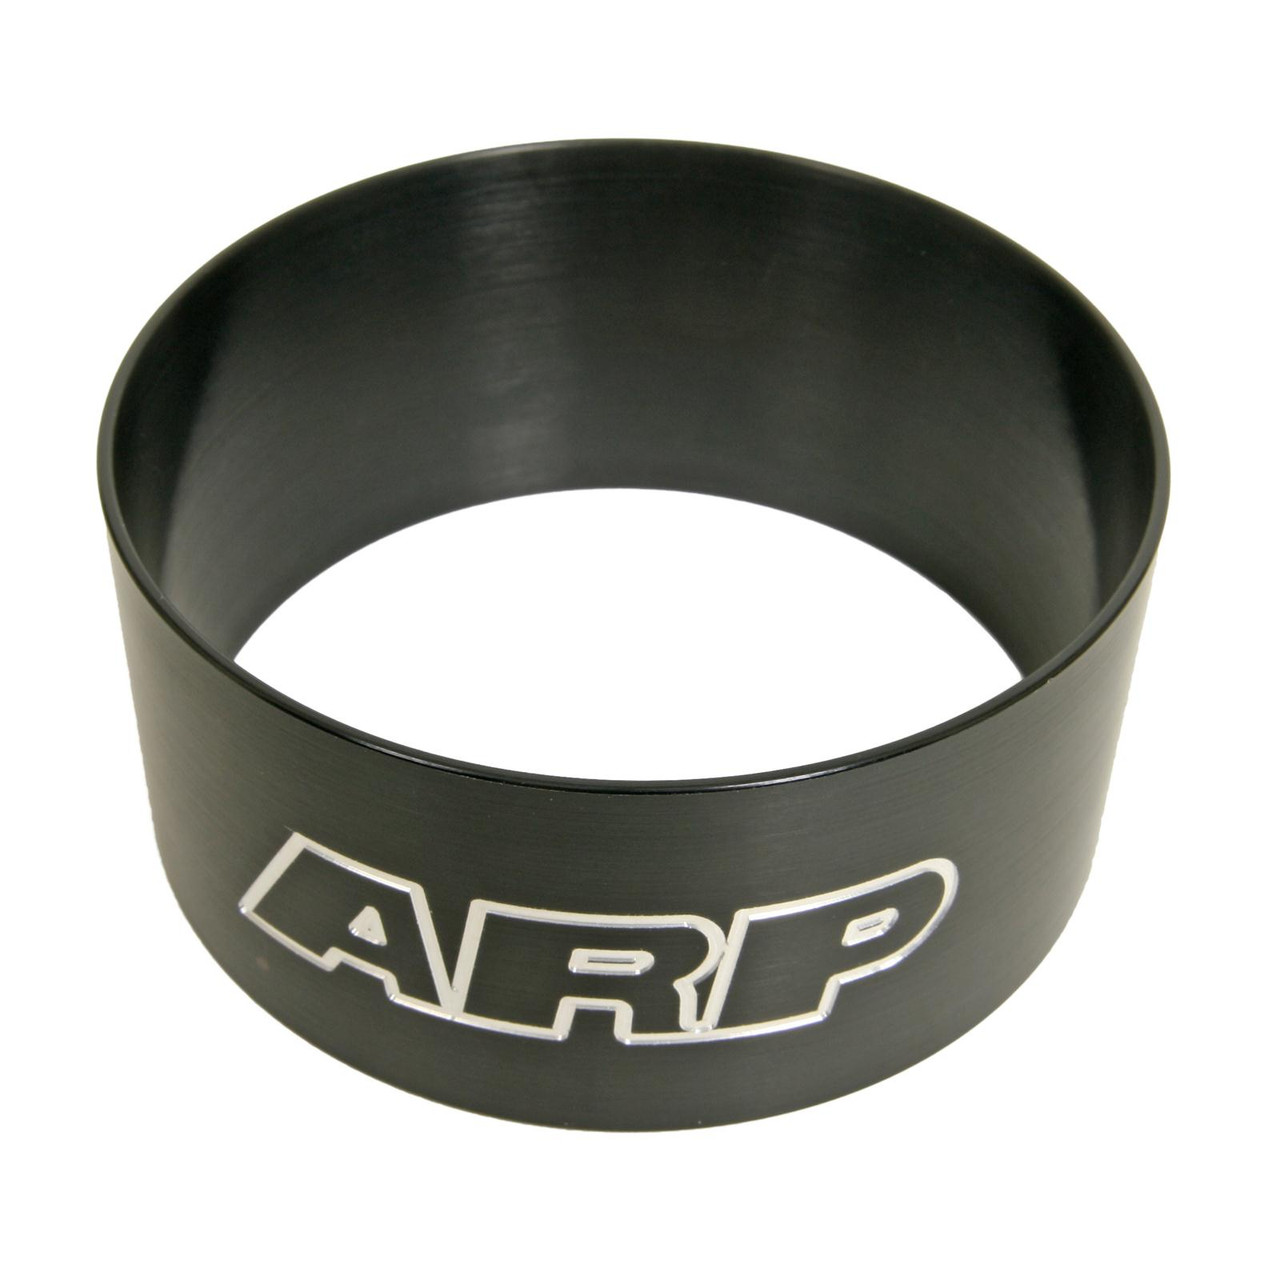 ARP 900-0400 Billet Tapered Piston Ring Compressor - For 4.040" Bore Engines